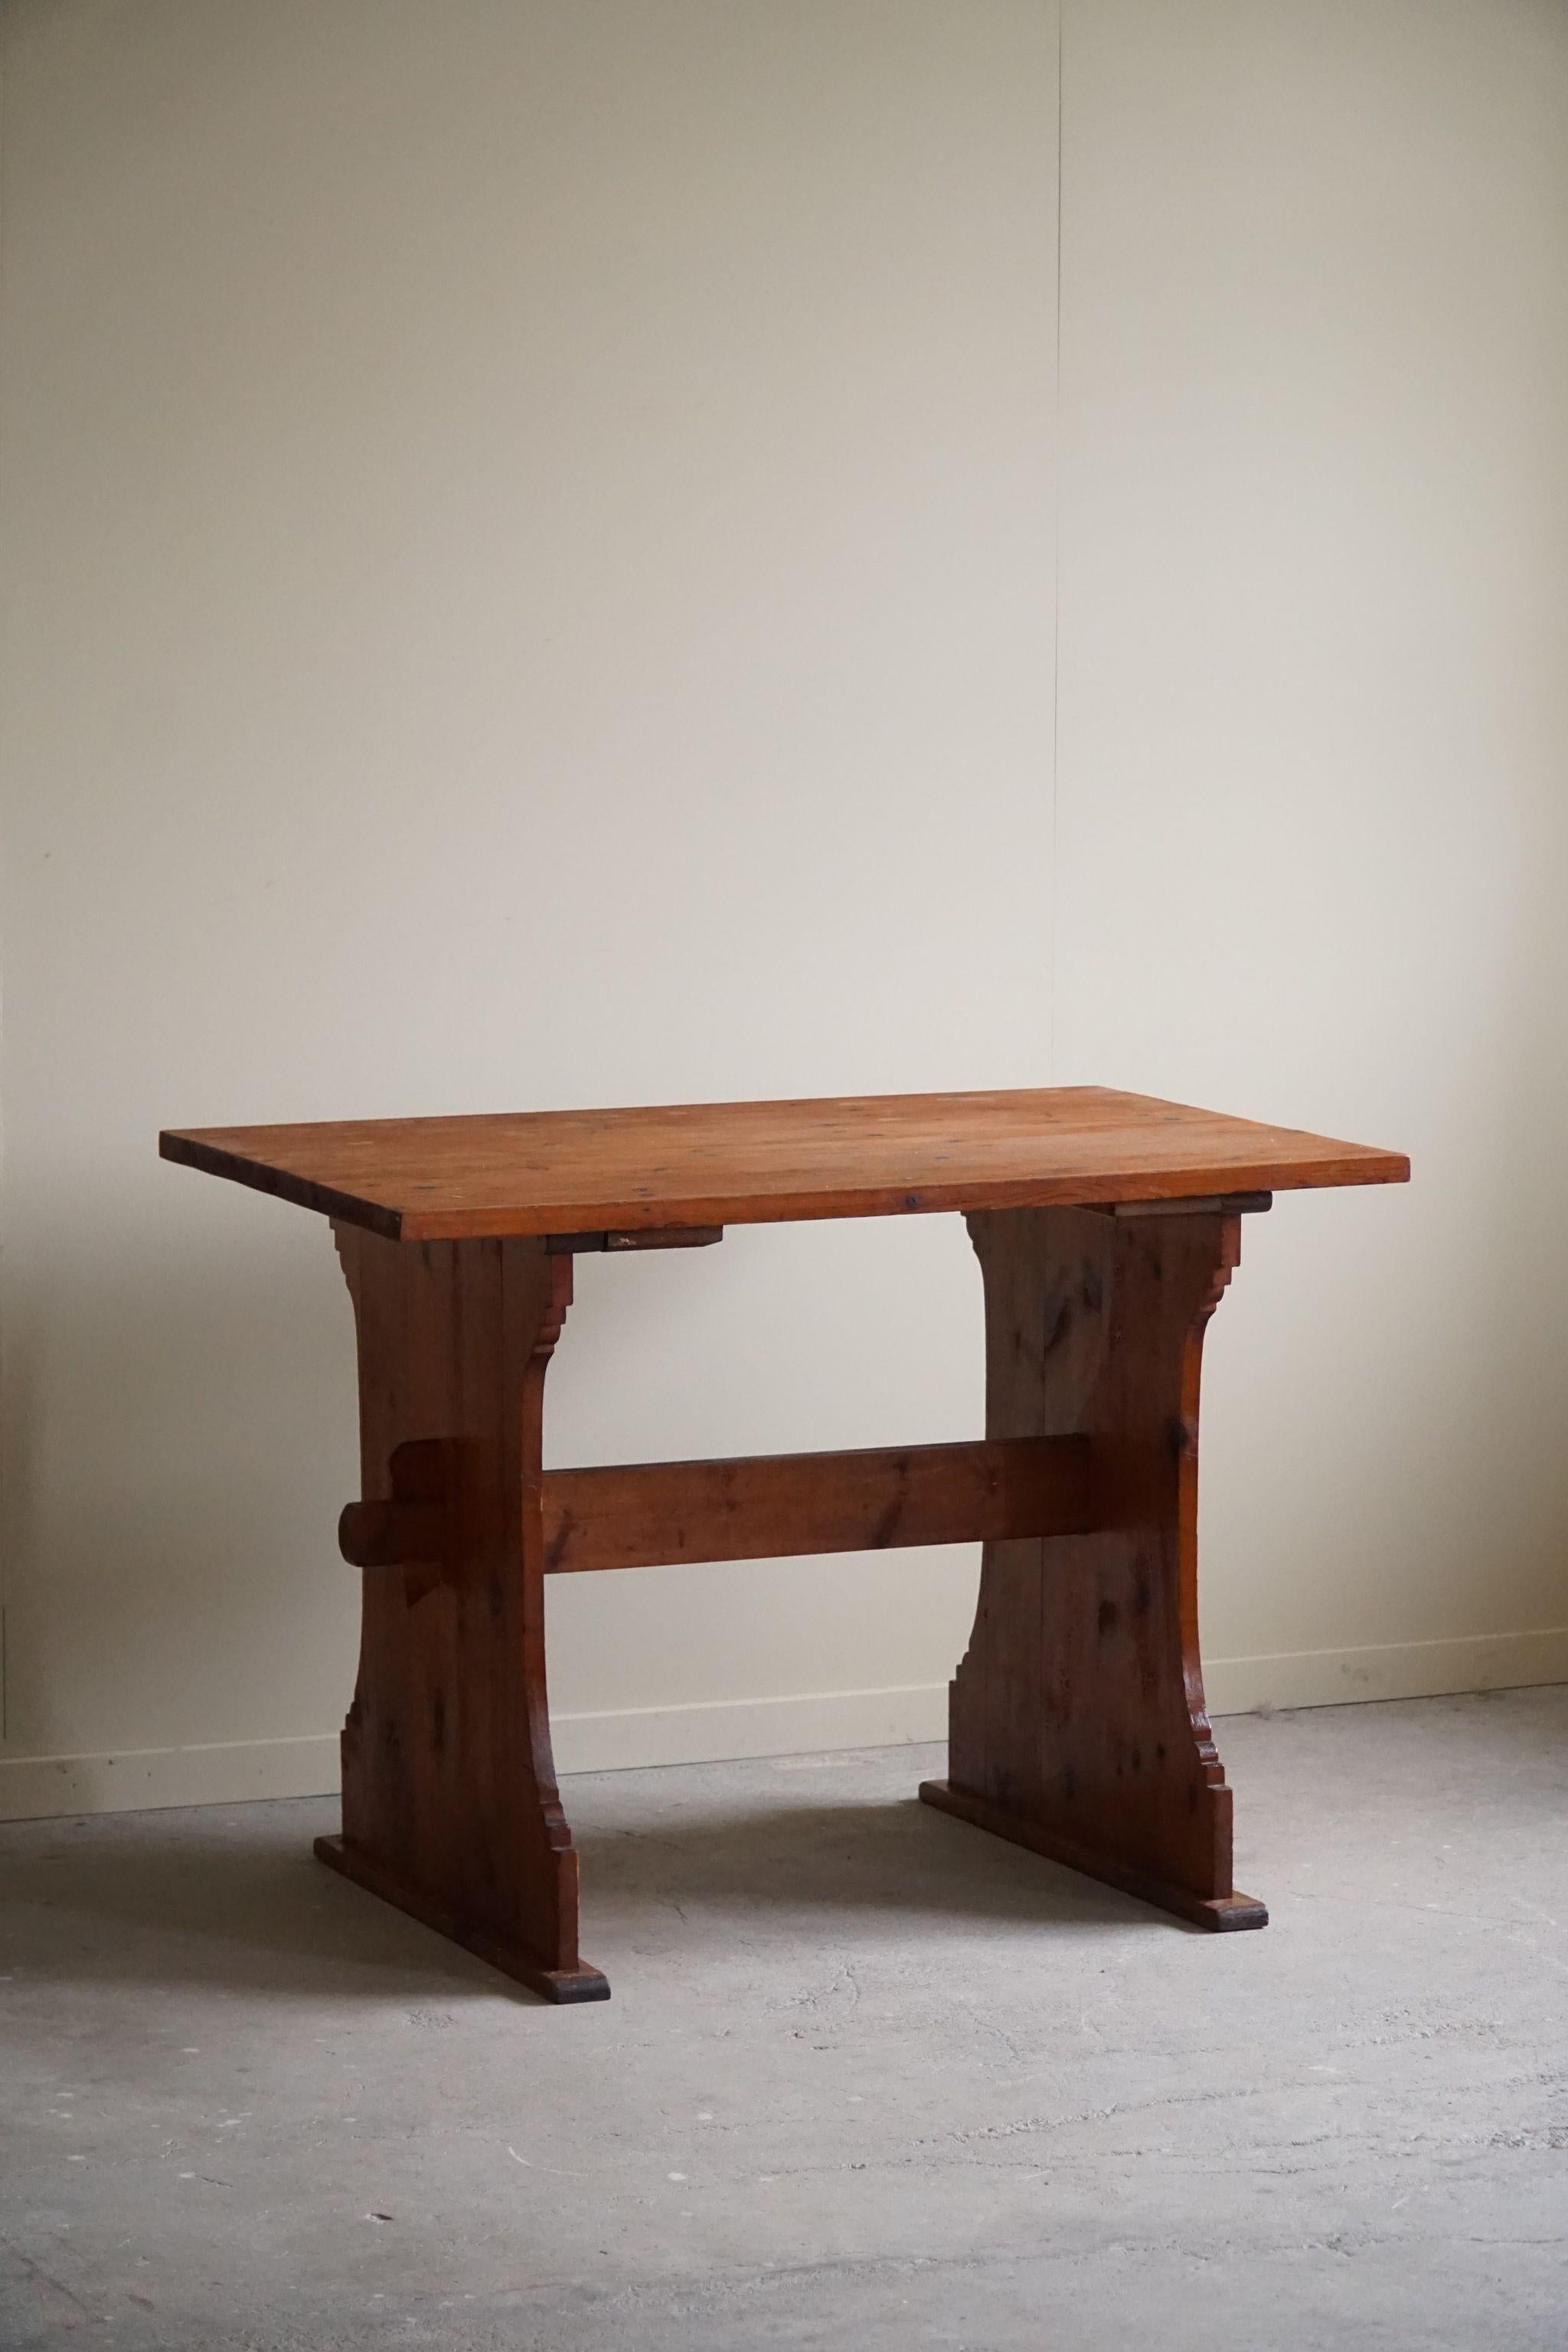 Swedish Modern Pine Desk, Axel Einar Hjorth Style, Made in the 1940s For Sale 5